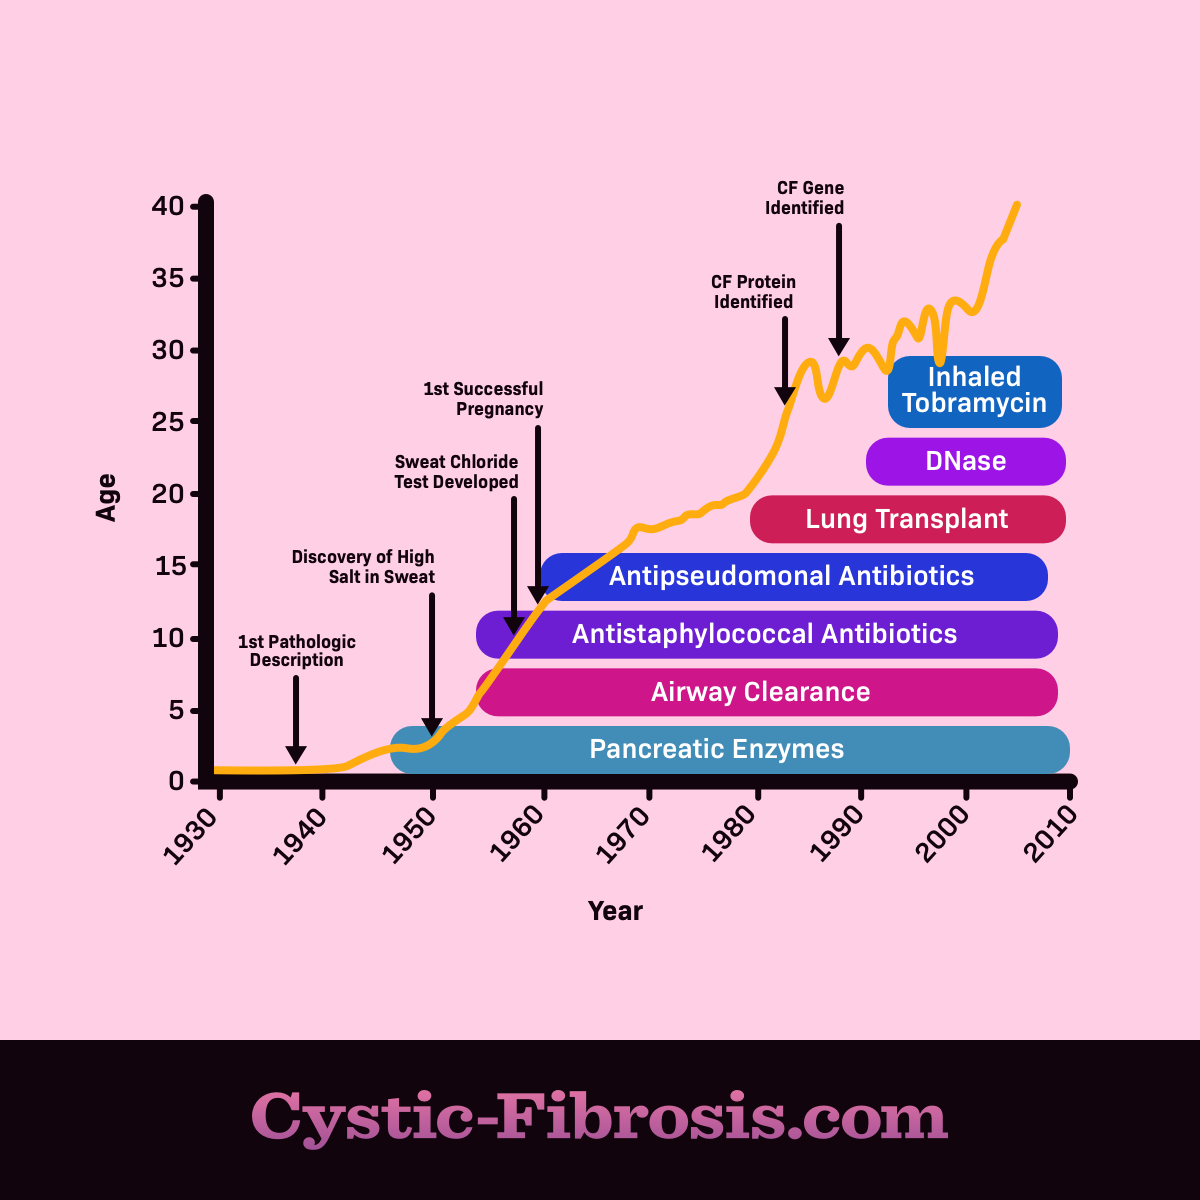 A timeline showing cystic fibrosis life expectancy from 1930 to 2010 with new treatment options